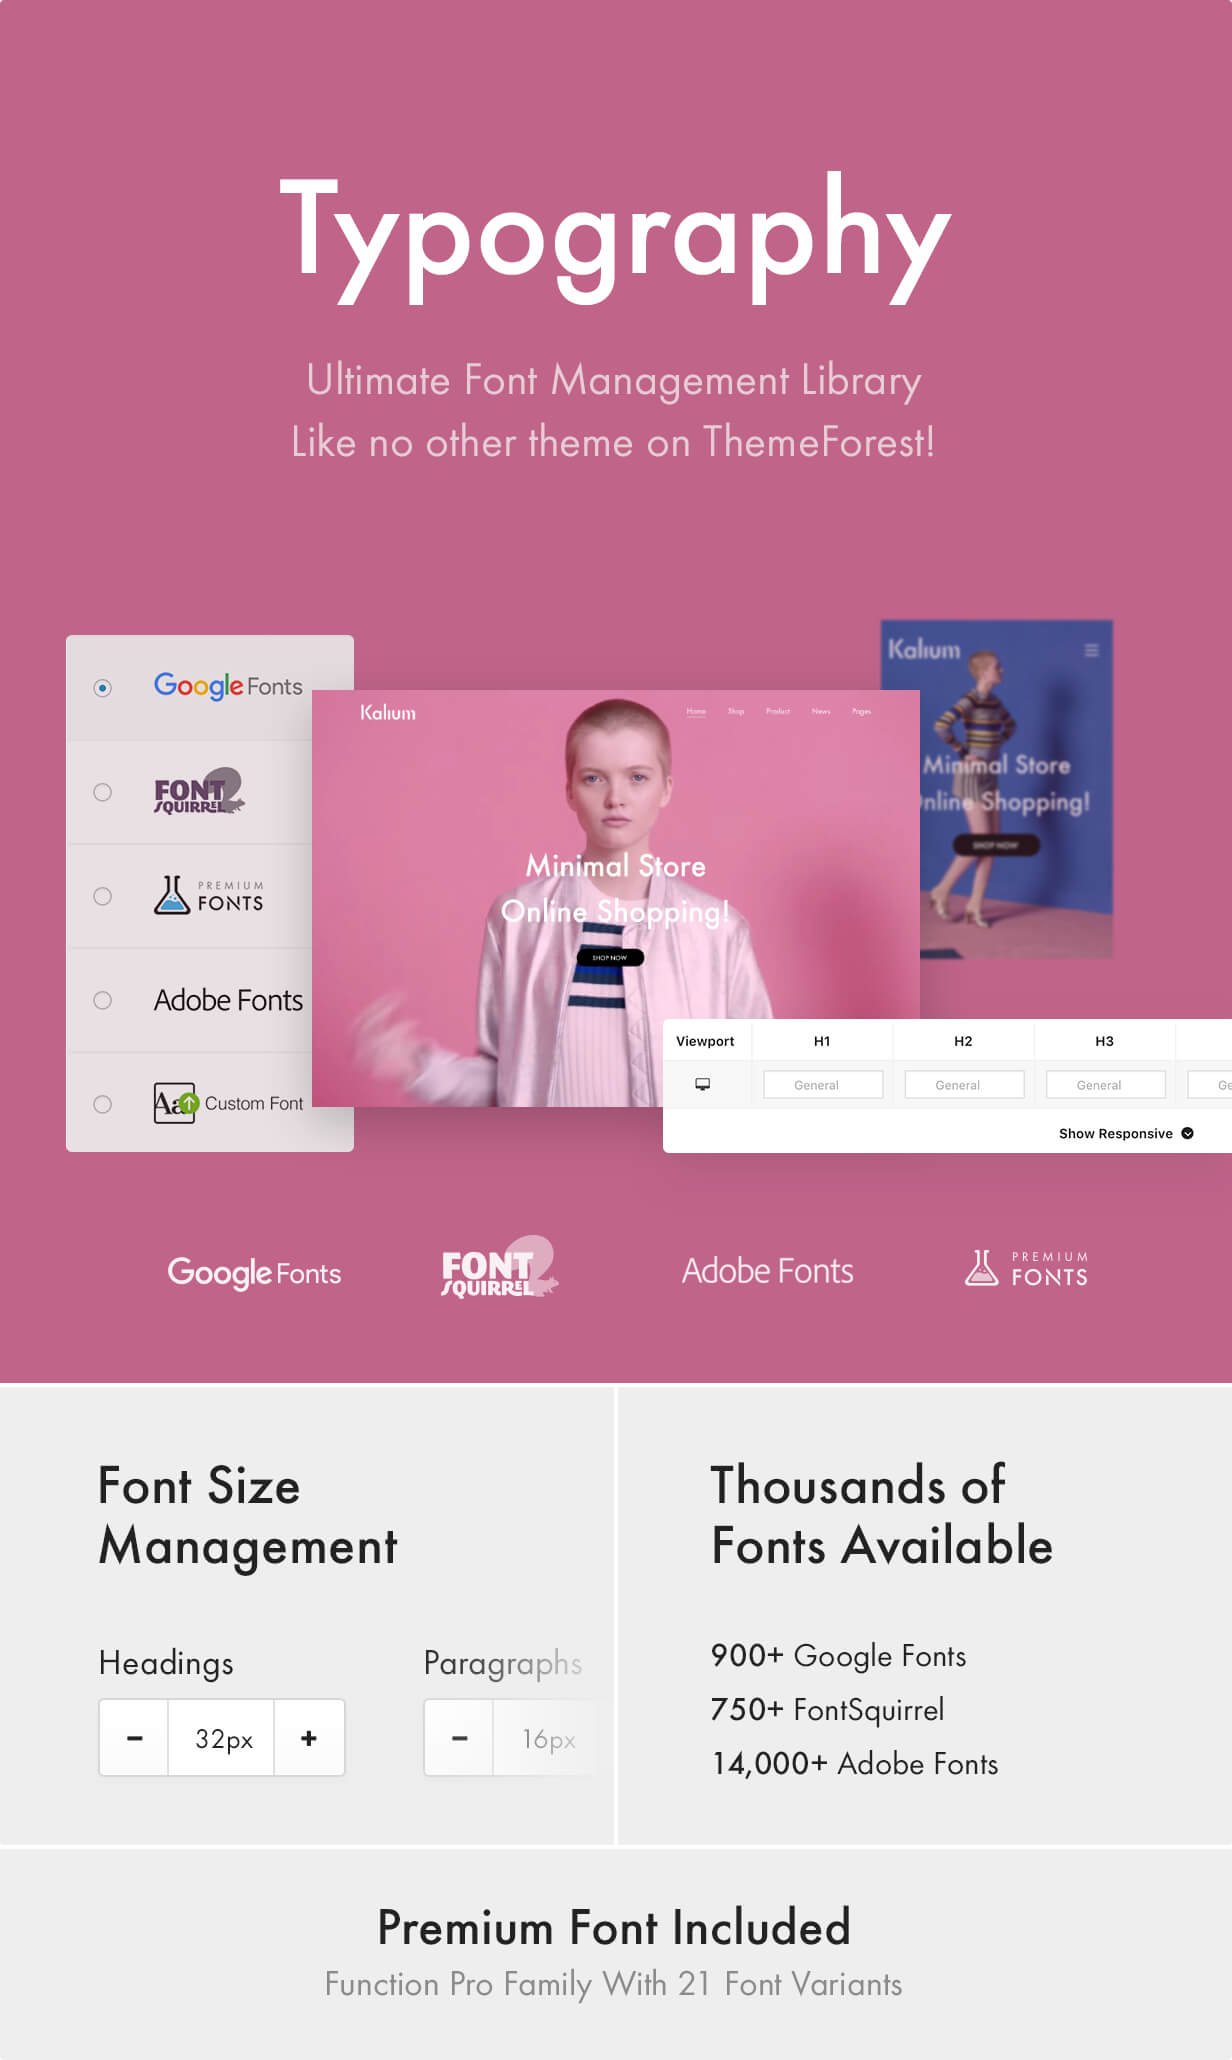 Ultimate Typography - Google Fonts, Font Squirrel, Adobe Fonts (formerly TypeKit), Premium Fonts and Custom Fonts